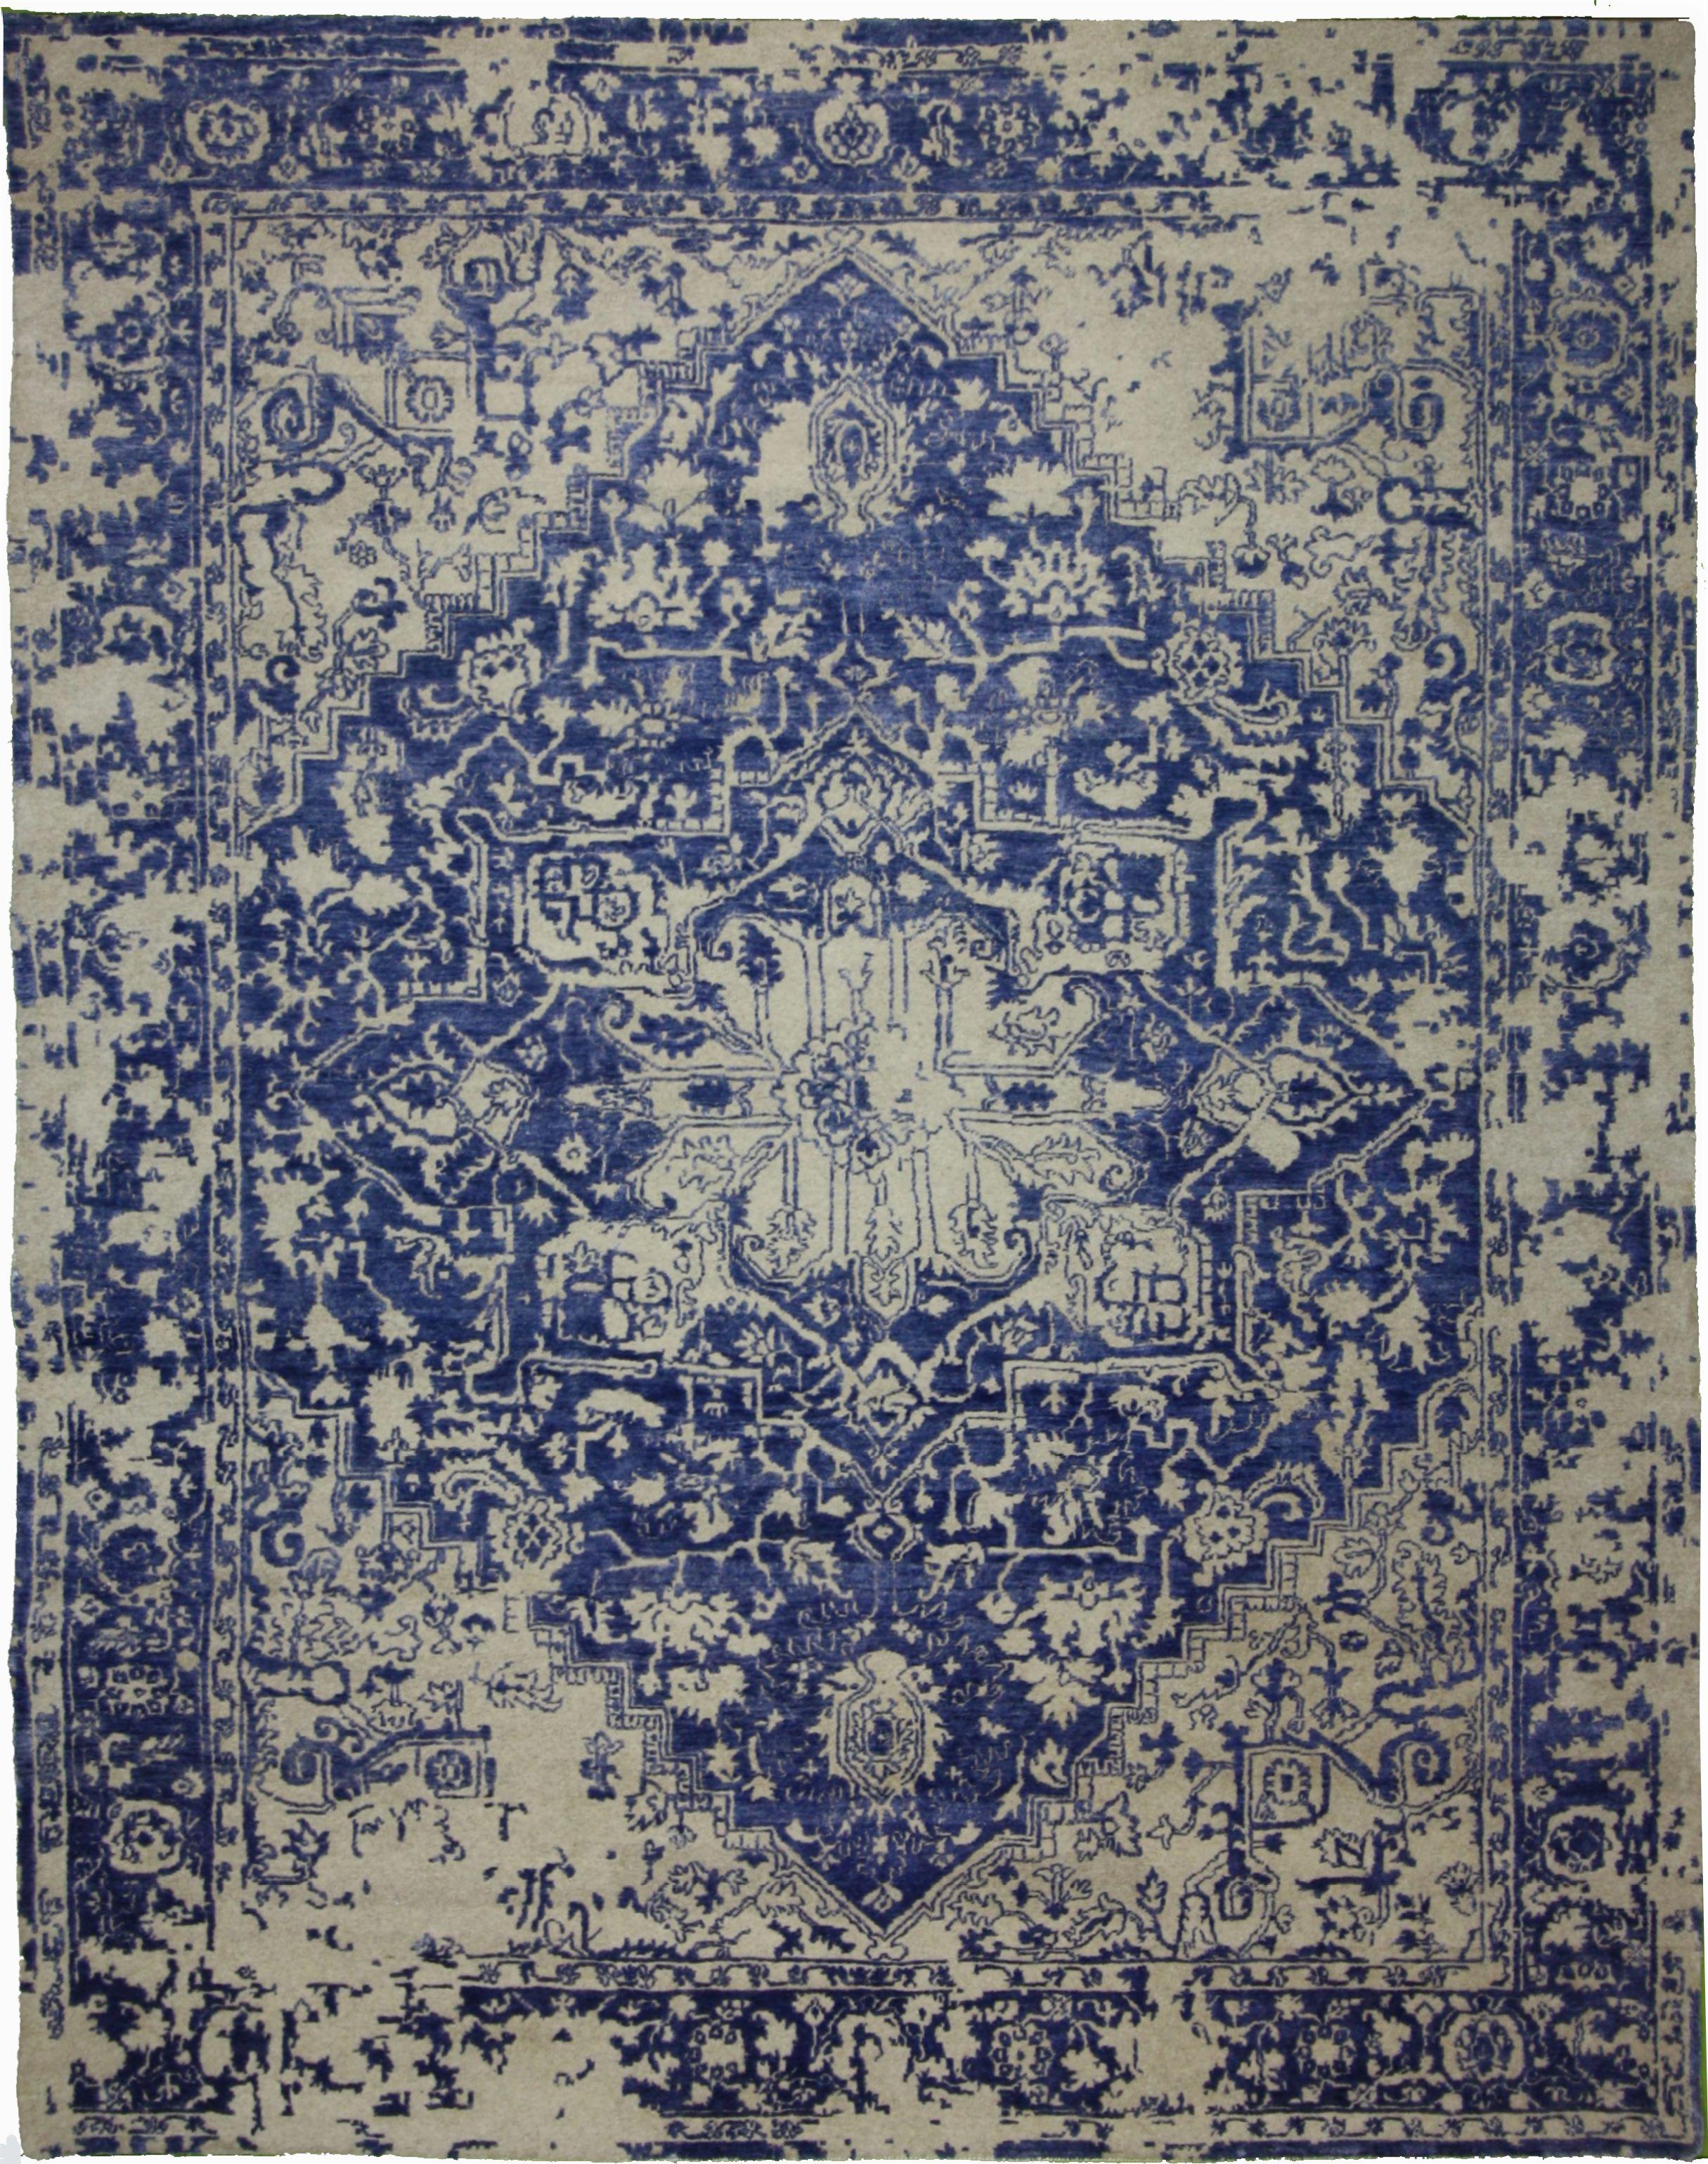 Hand Knotted Wool Blue Dk Transitional India Rug 7'9" x 9'10"